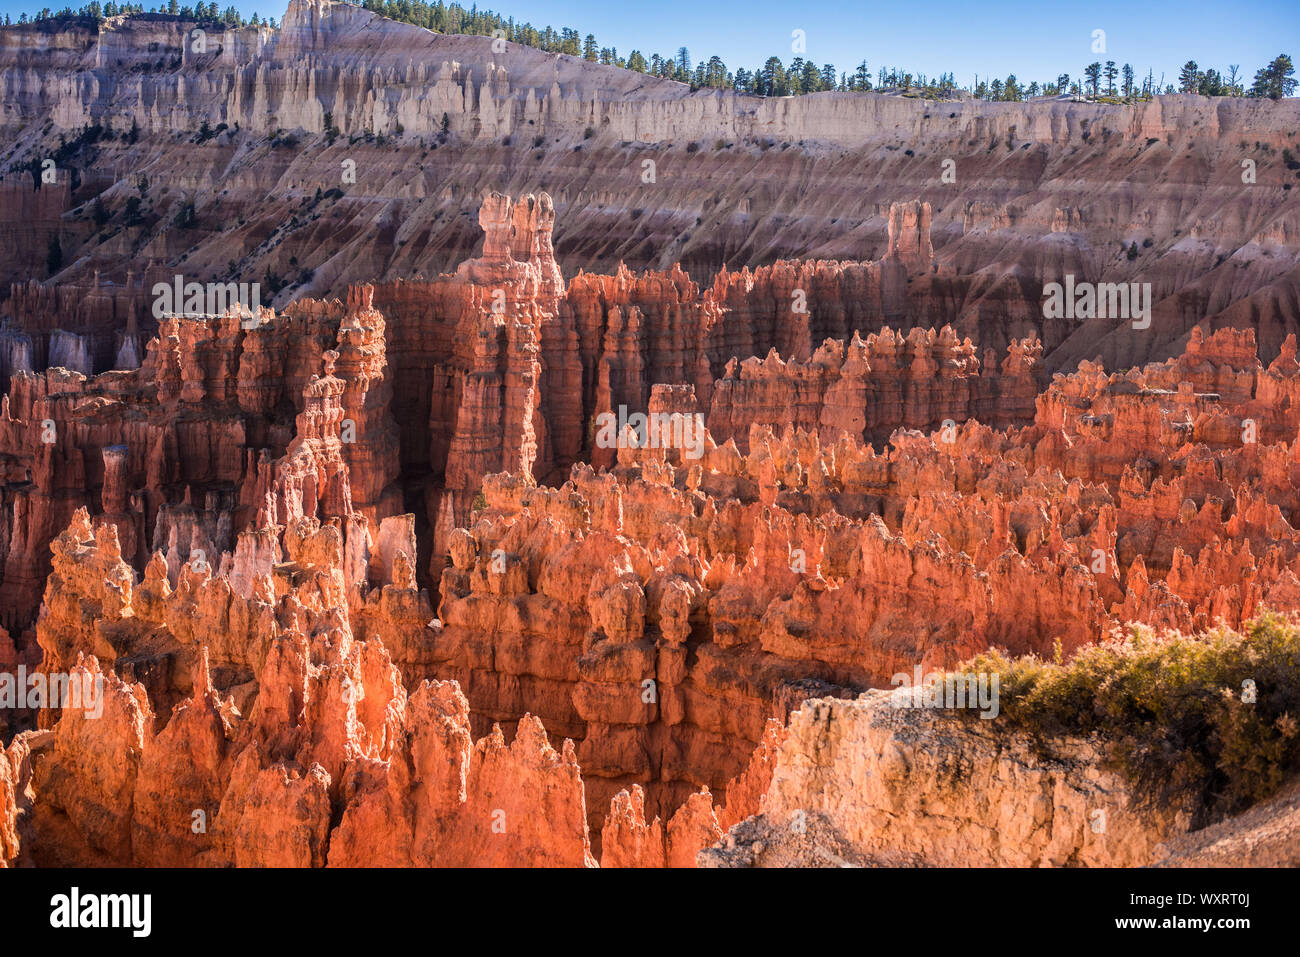 Pine tree grows among the Rock Formations which are lit up by the setting sun at Bryce Canyon National Park Stock Photo